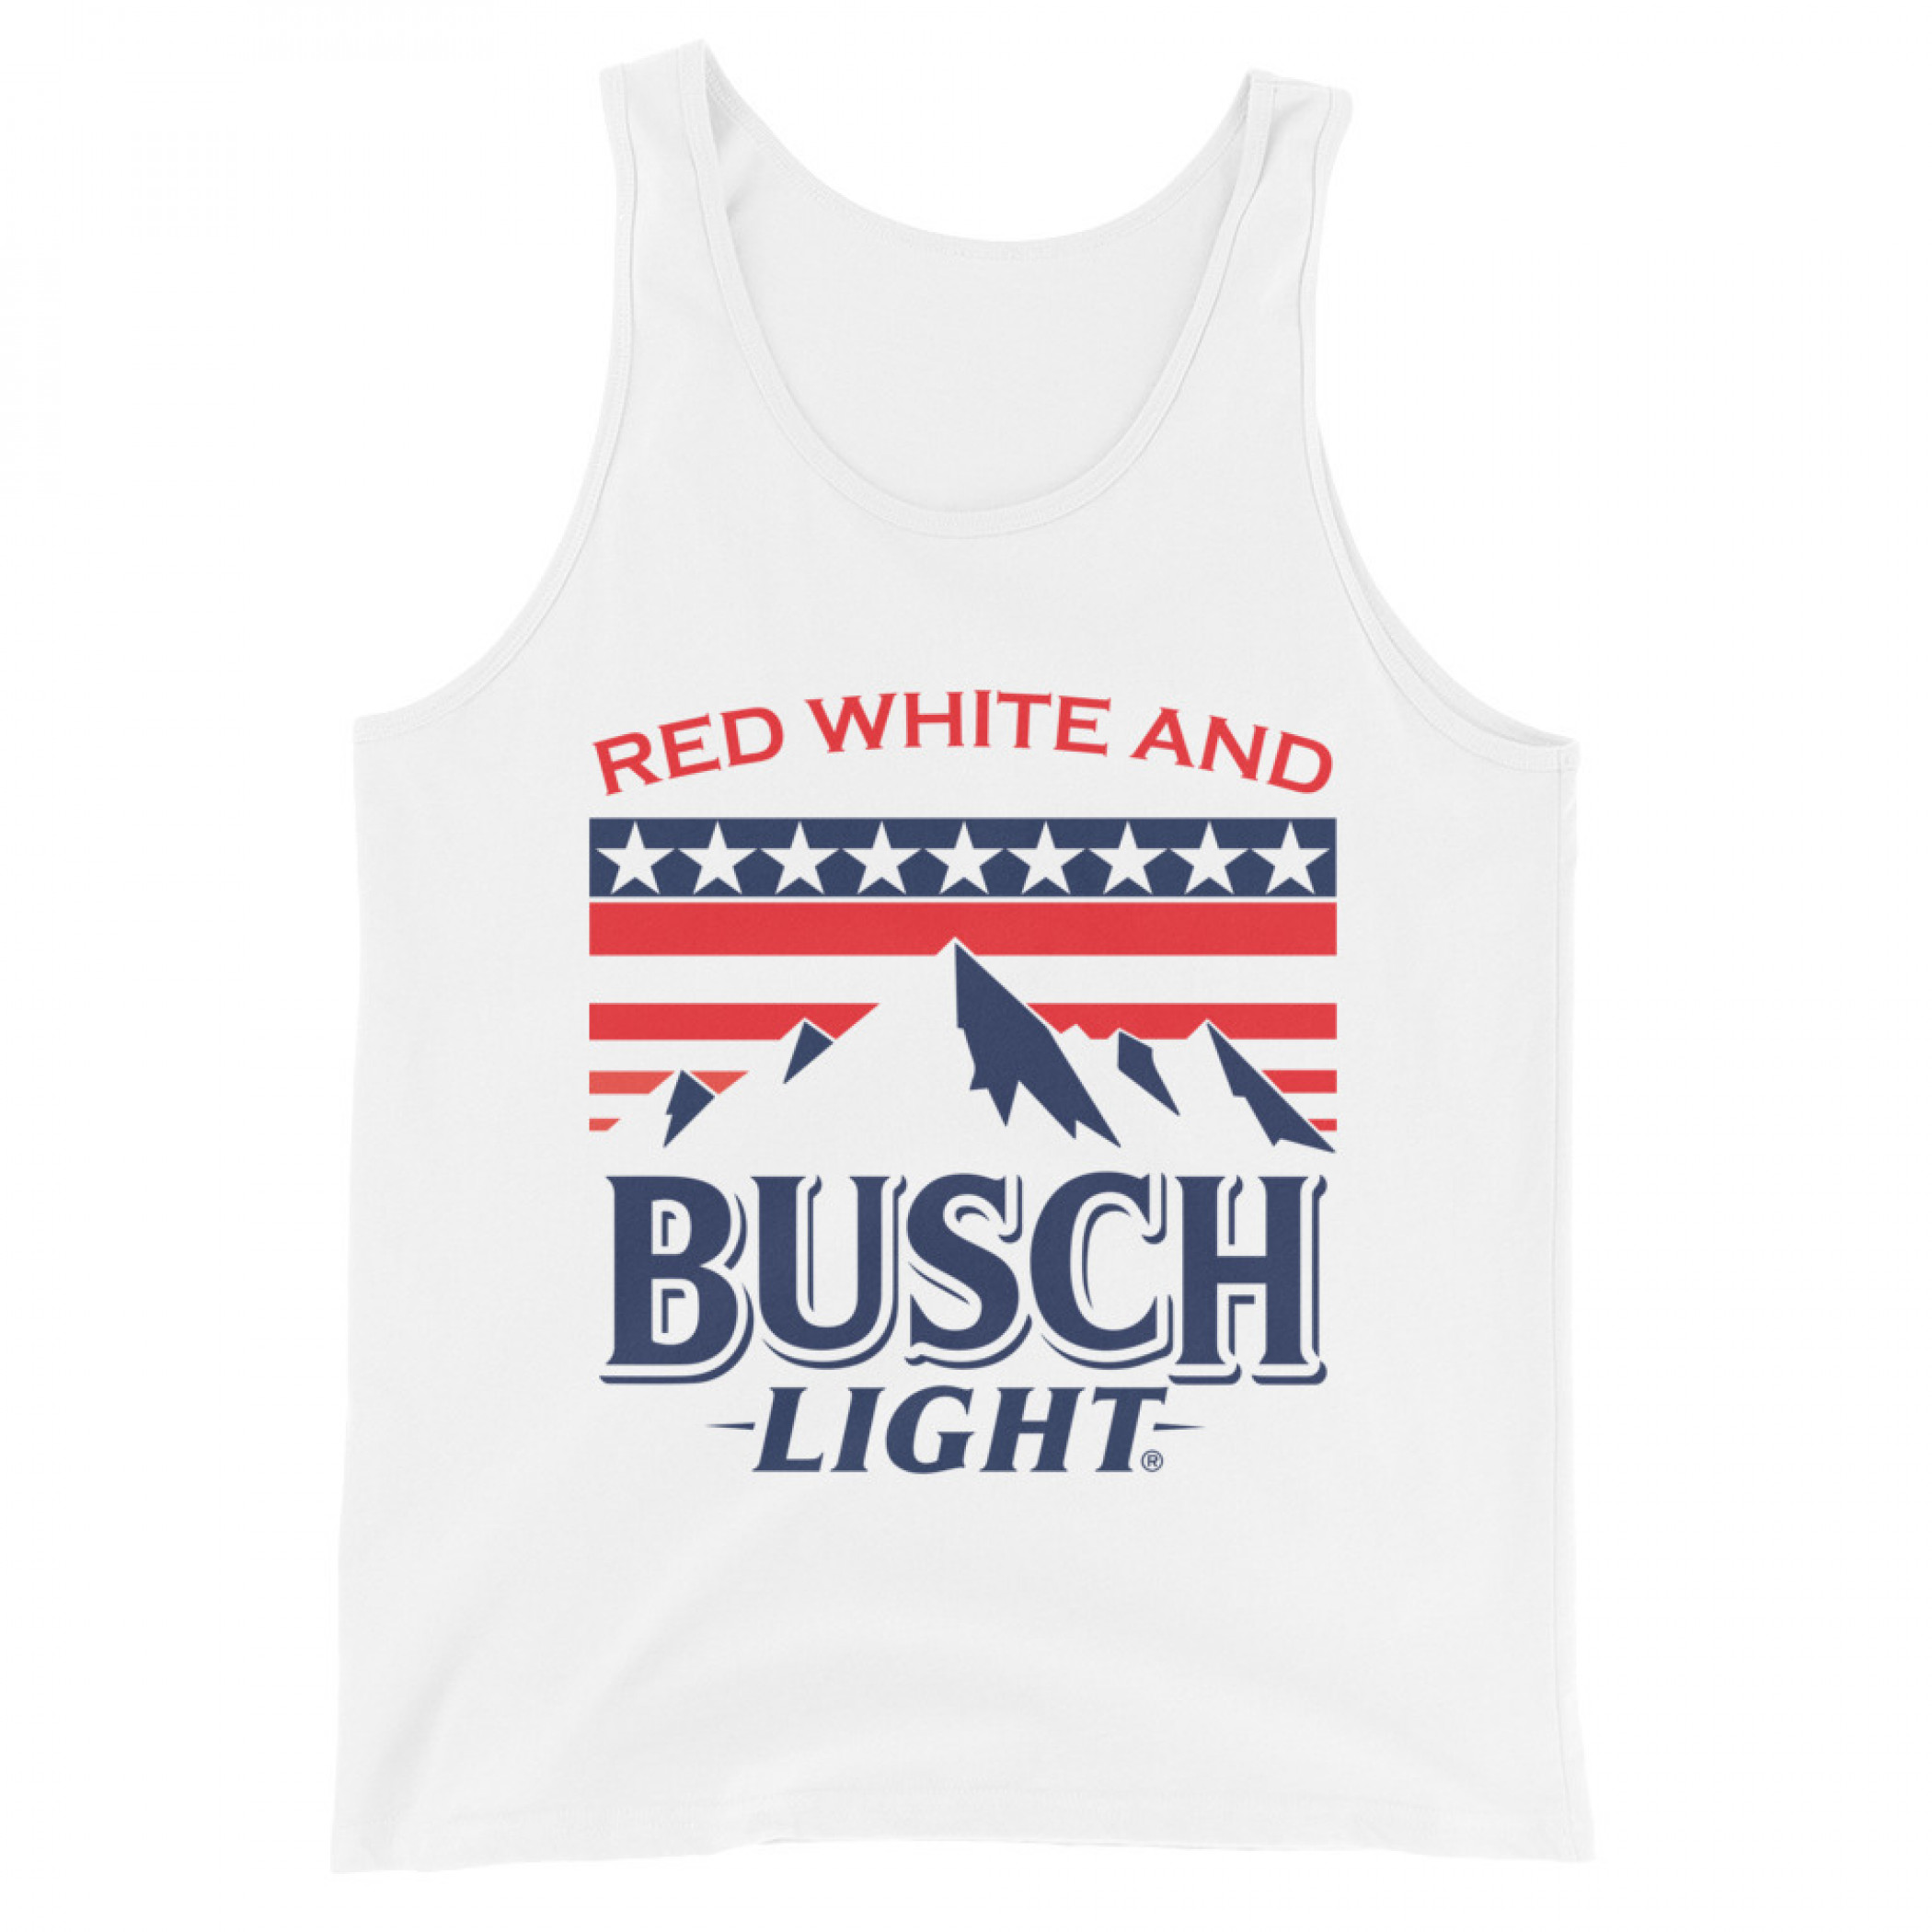 Busch Light Red White and Busch Light Mountains White Tank Top